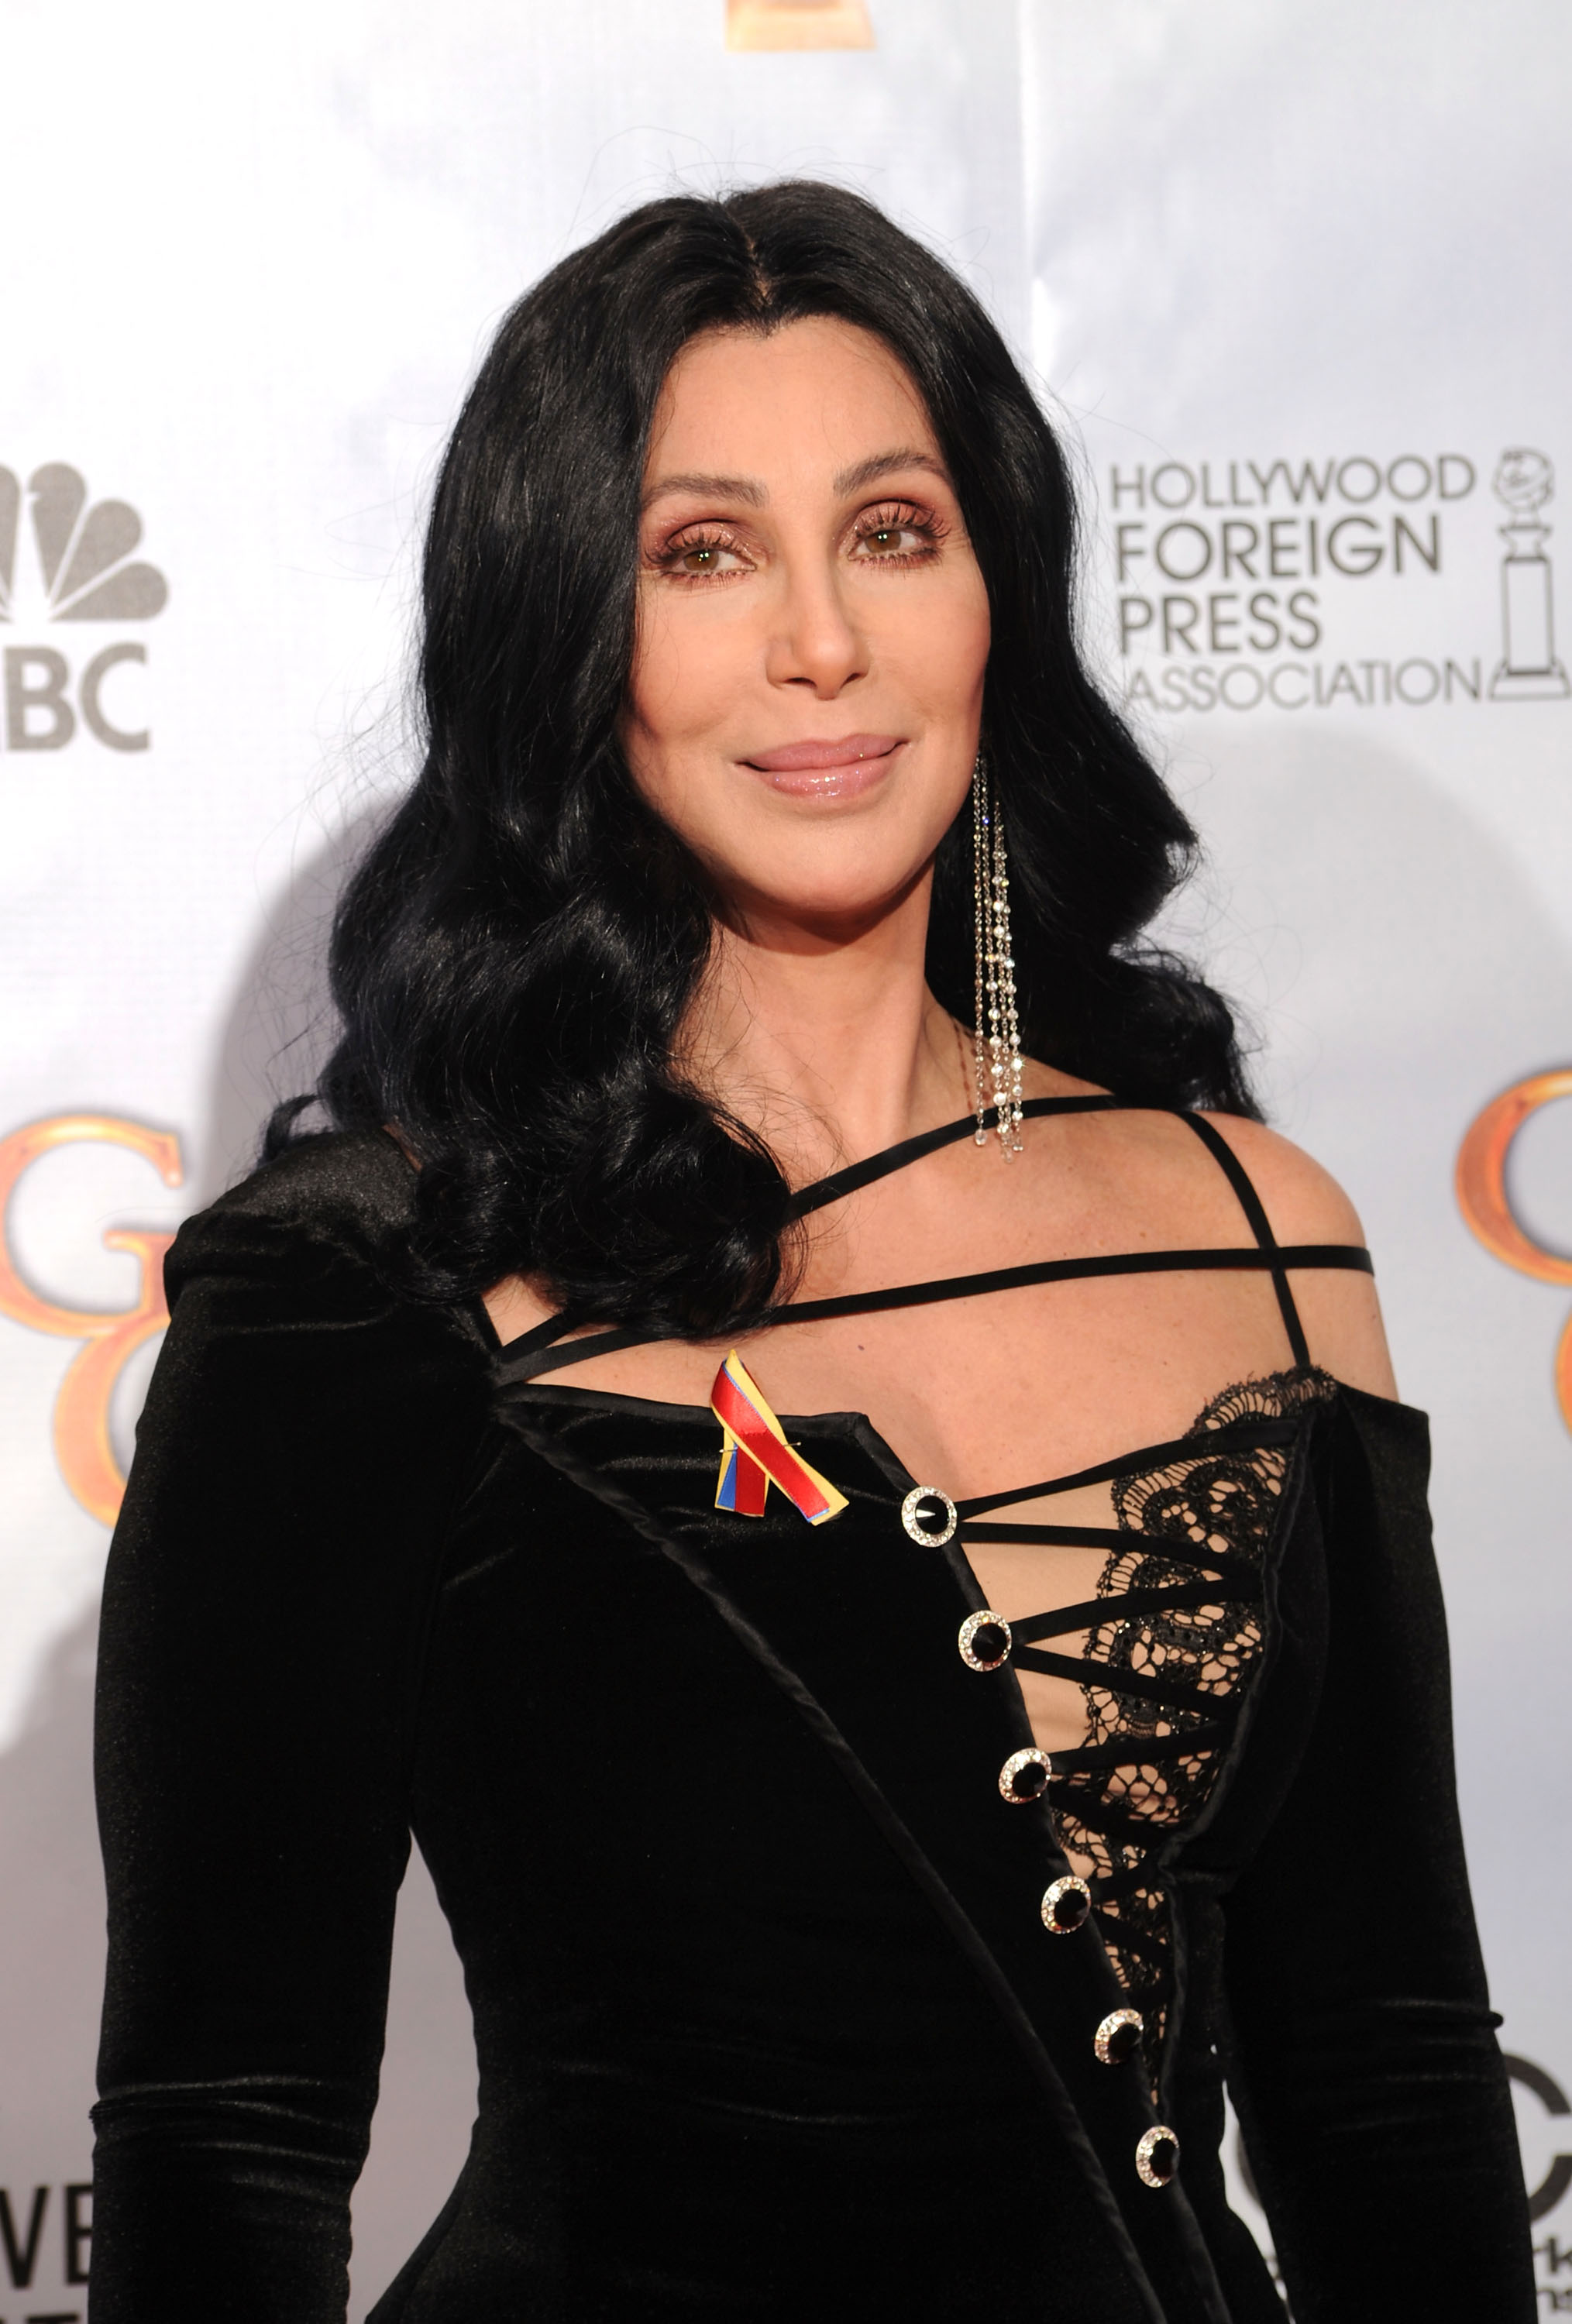 Cher poses at the 67th Annual Golden Globe Awards at The Beverly Hilton Hotel on January 17, 2010 in Beverly Hills, California. | Source: Getty Images